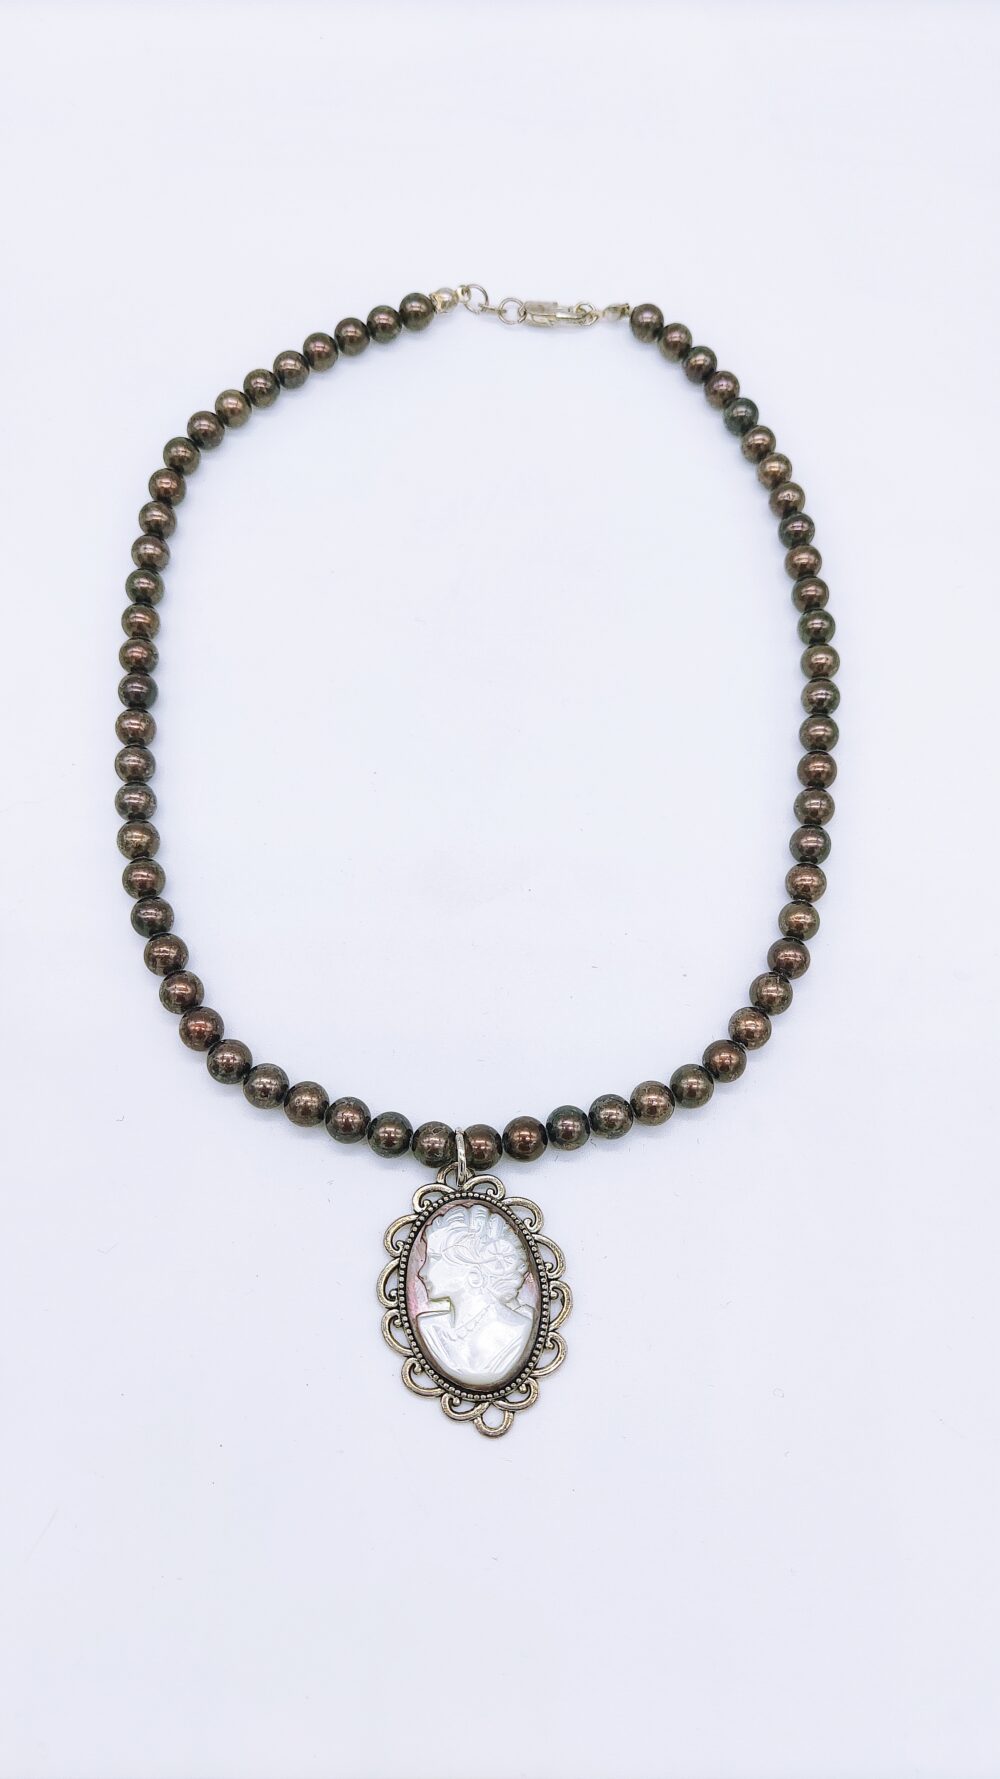 Necklace brown pearls and cameo pendant vintage style 4